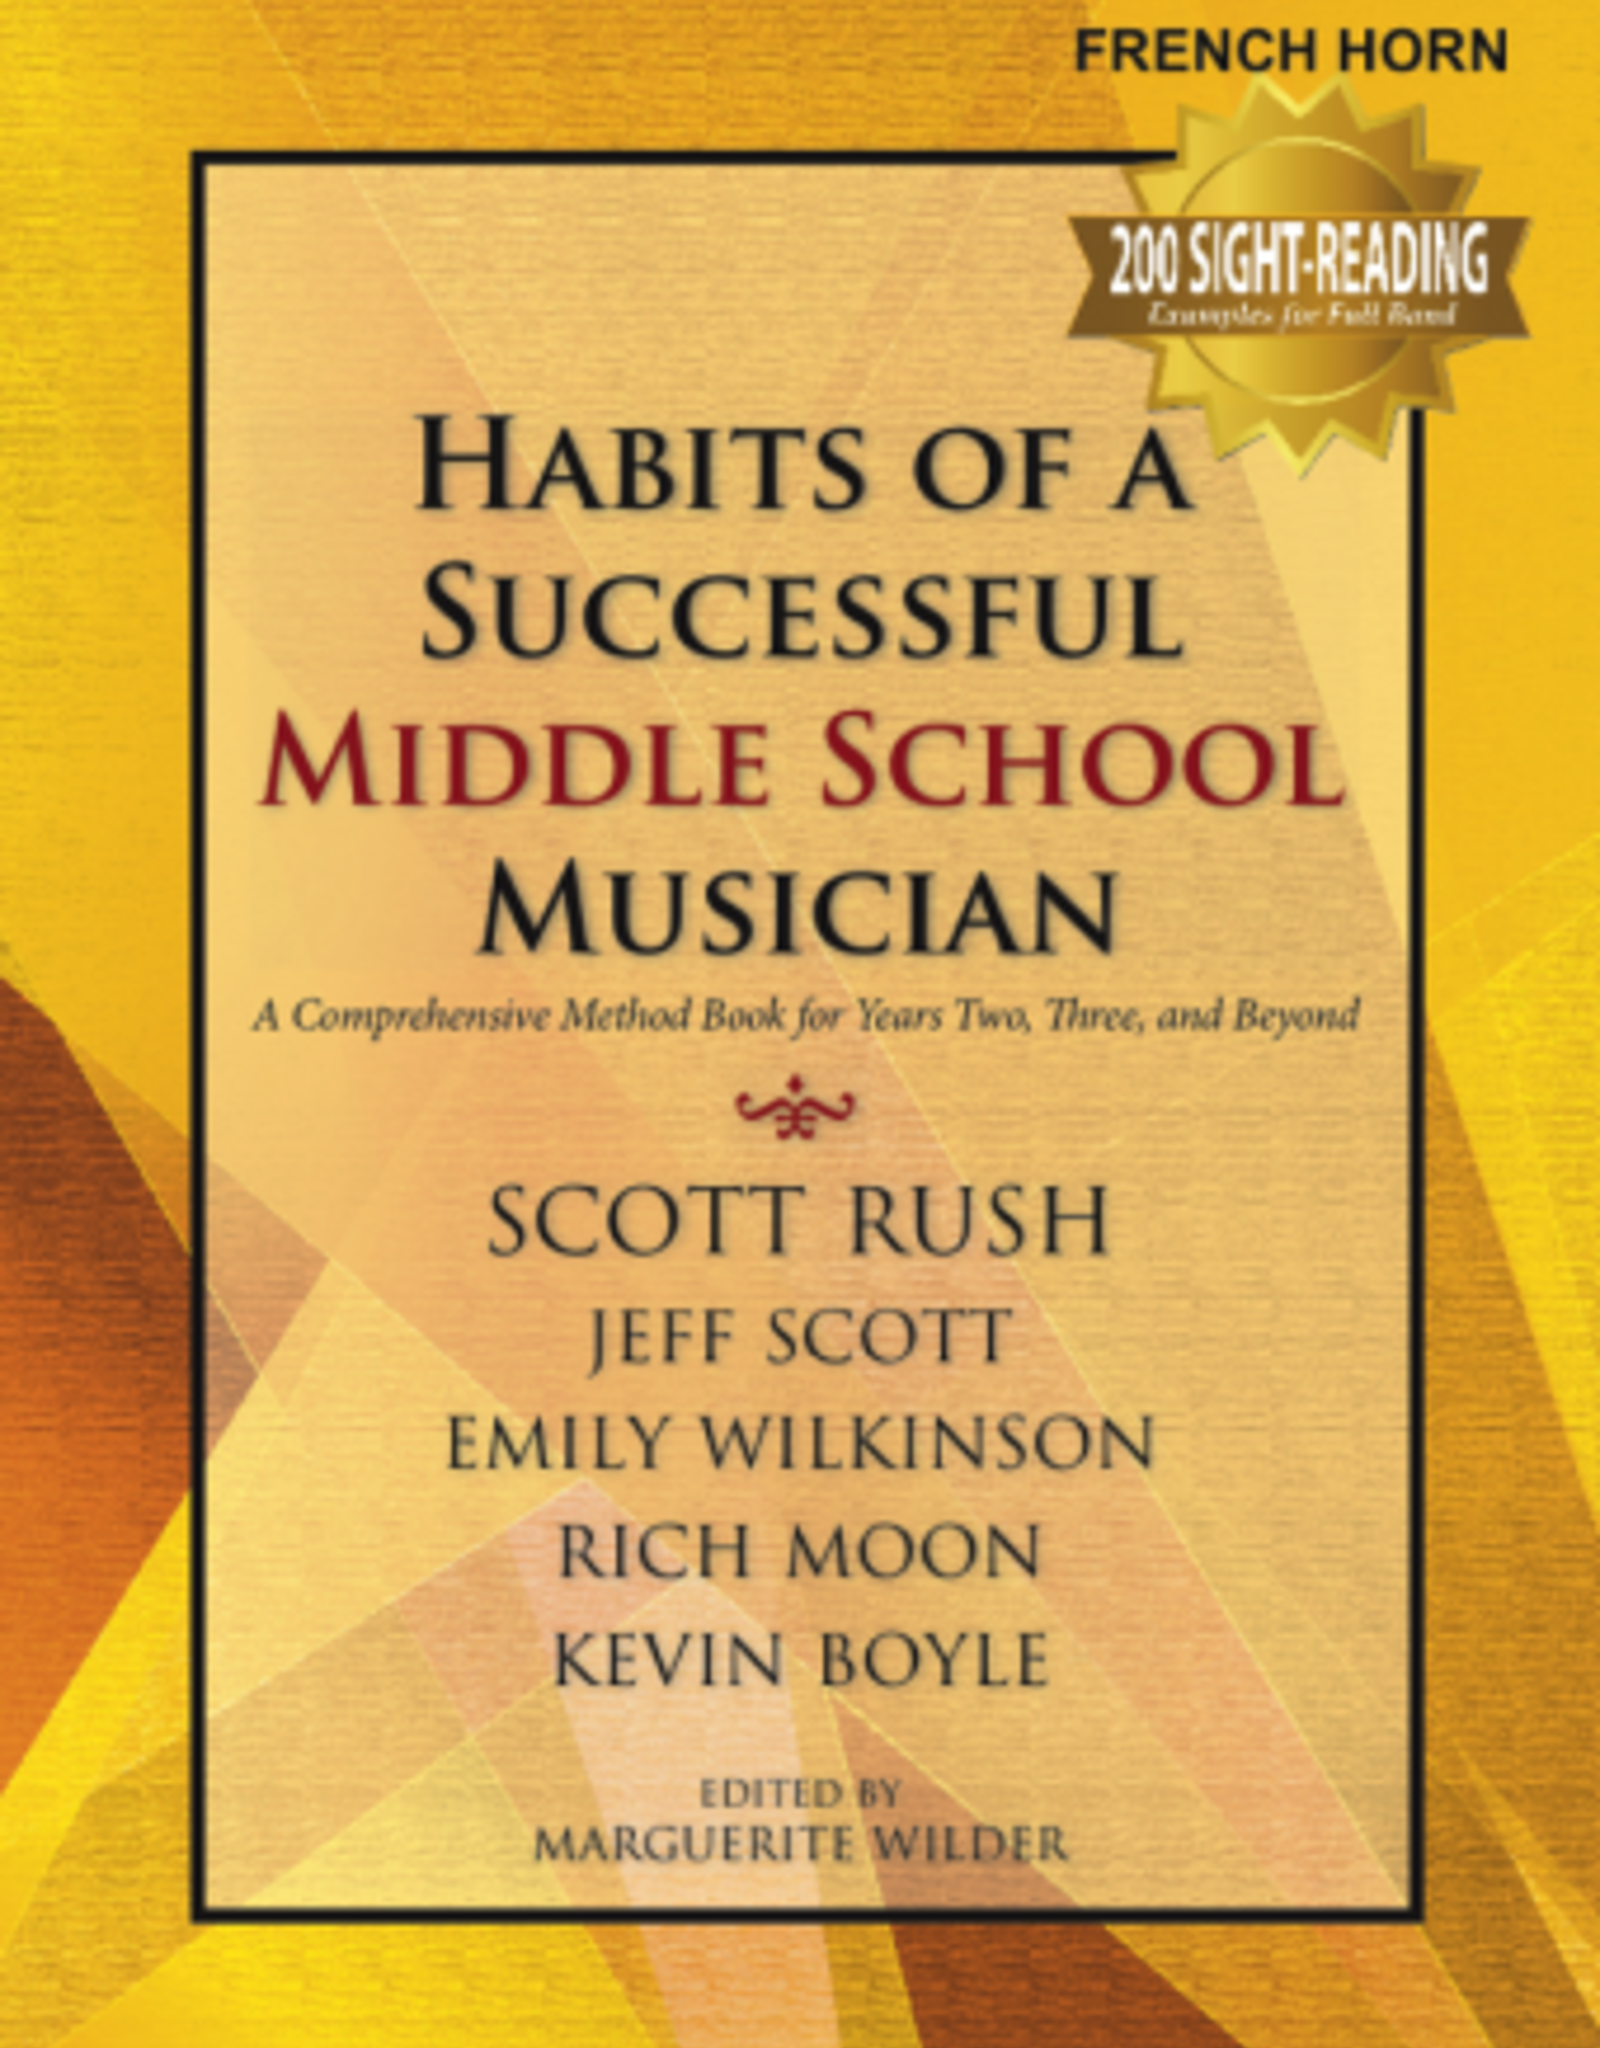 GIA Publications Habits of a Successful Middle School Musician-French Horn